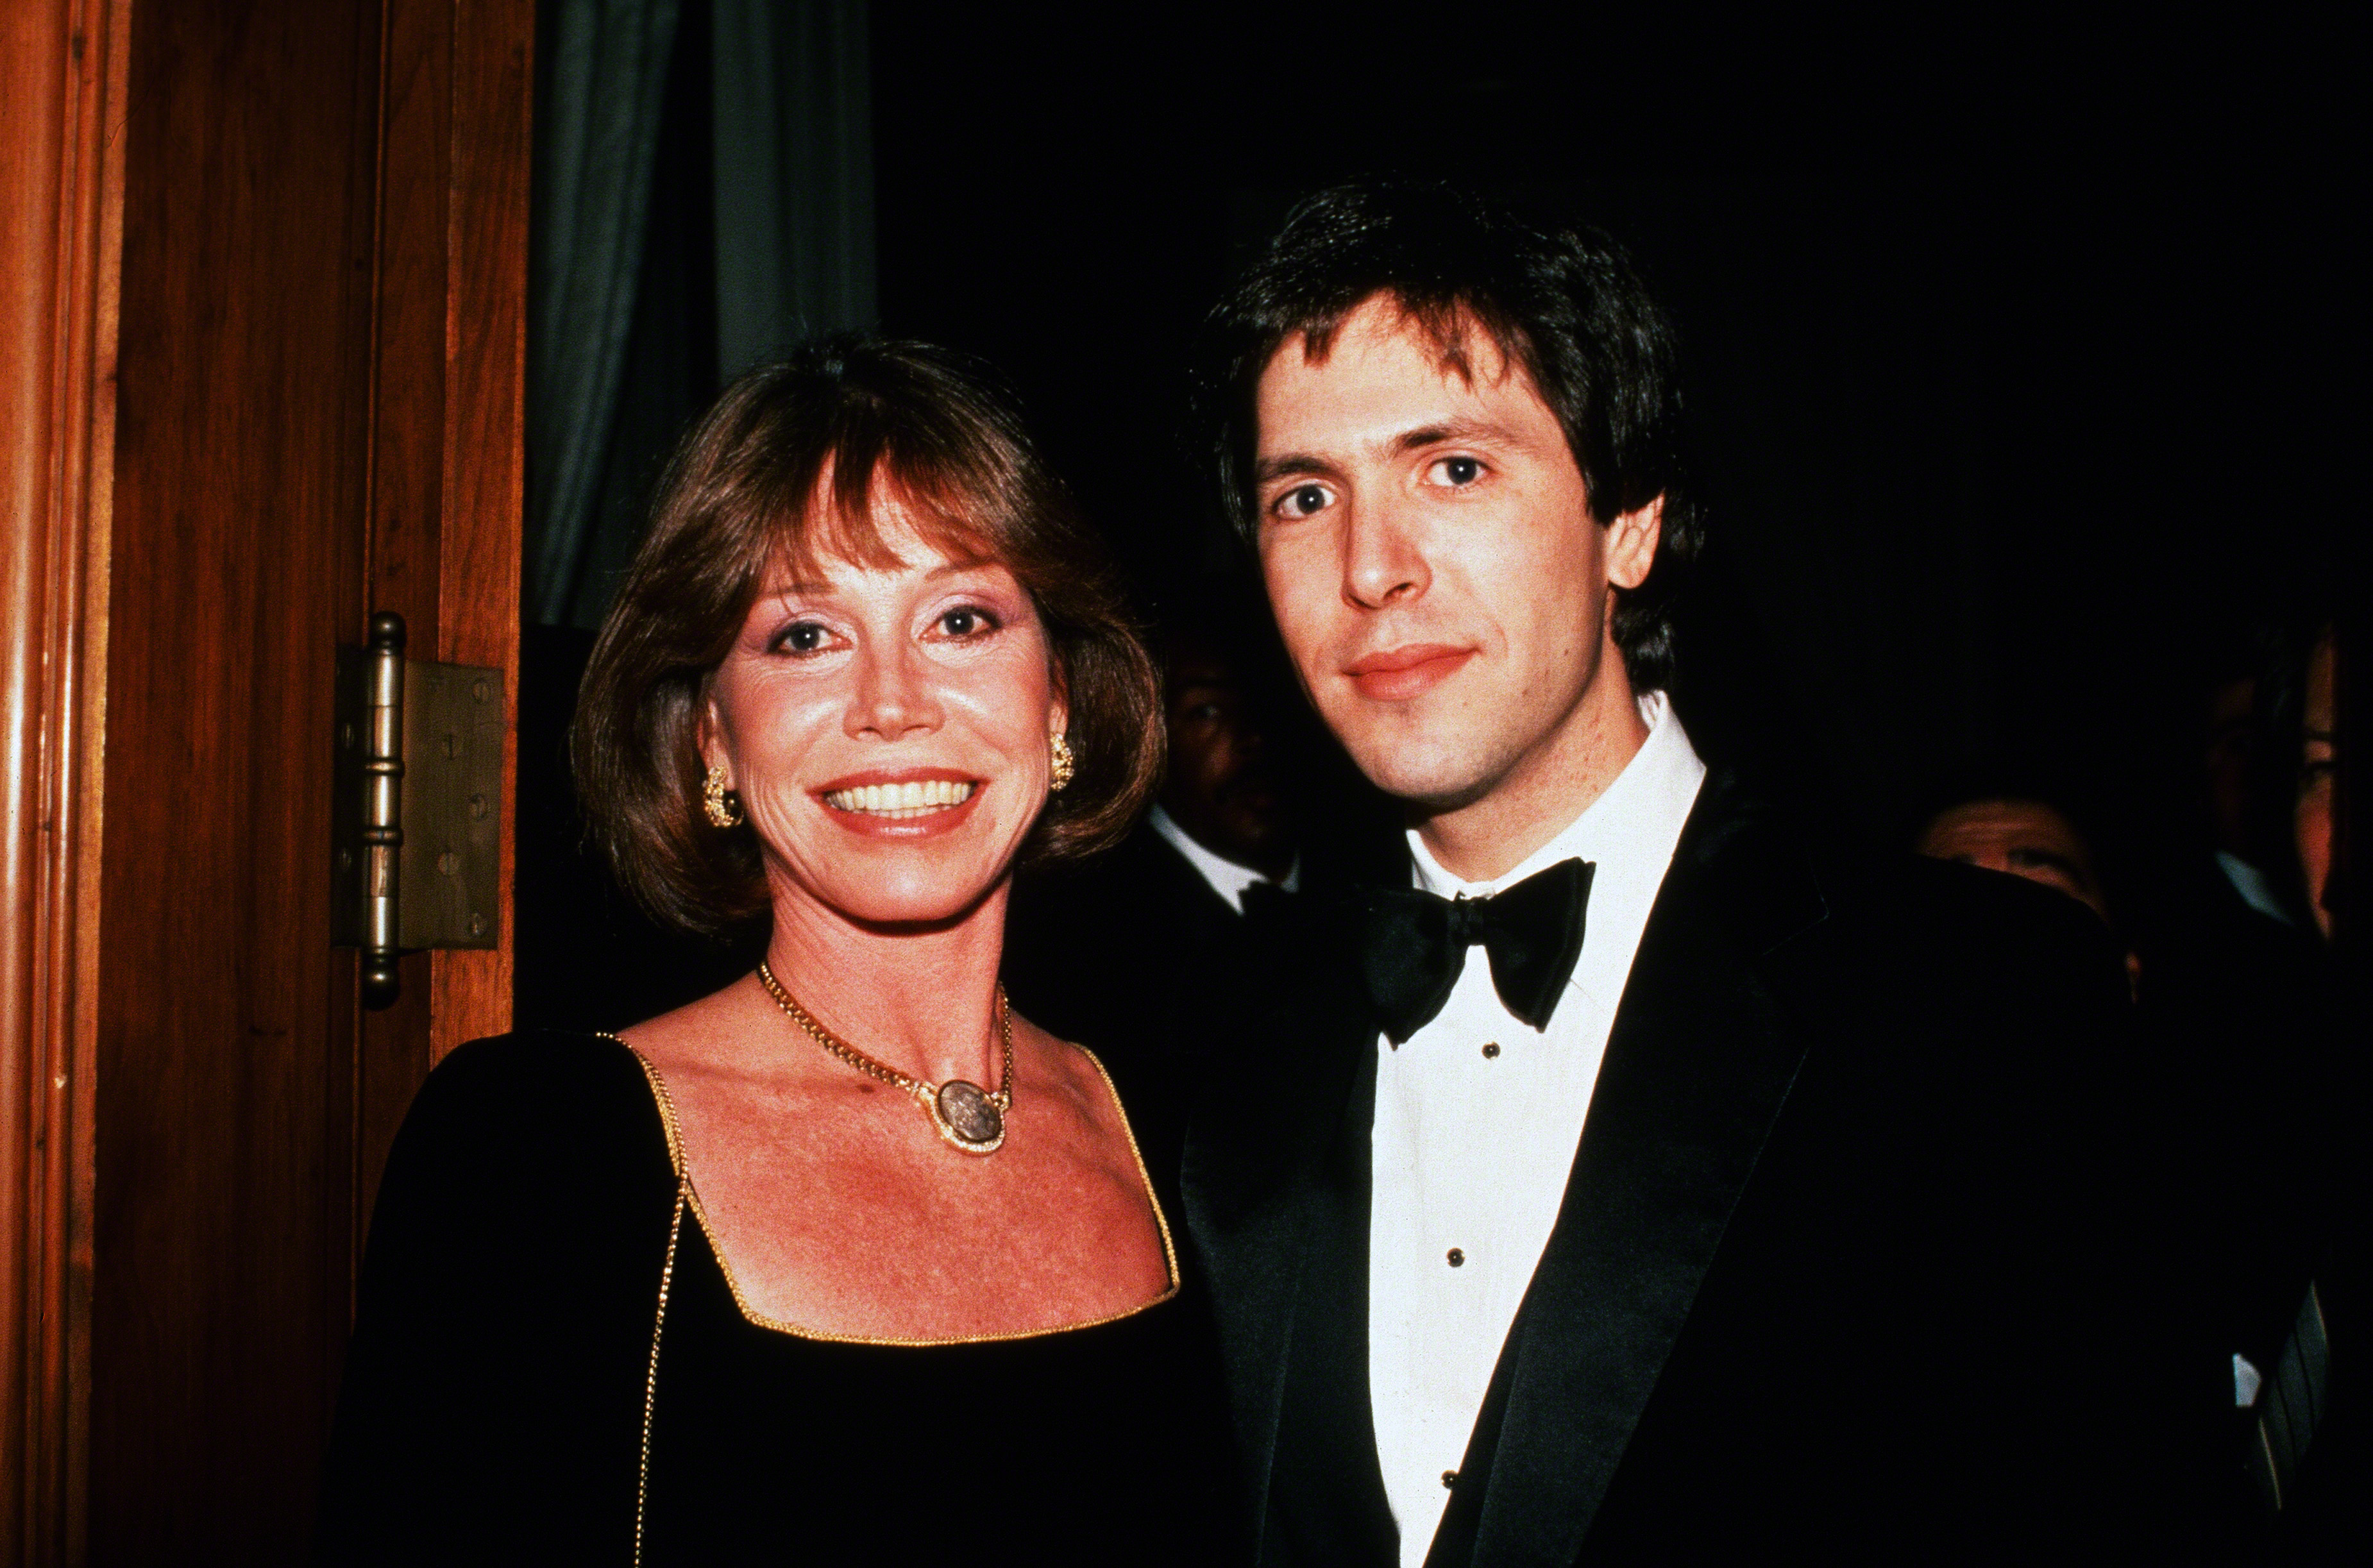 Mary Tyler Moore and Dr. Robert Levine in New York, circa 1984 | Source: Getty Images